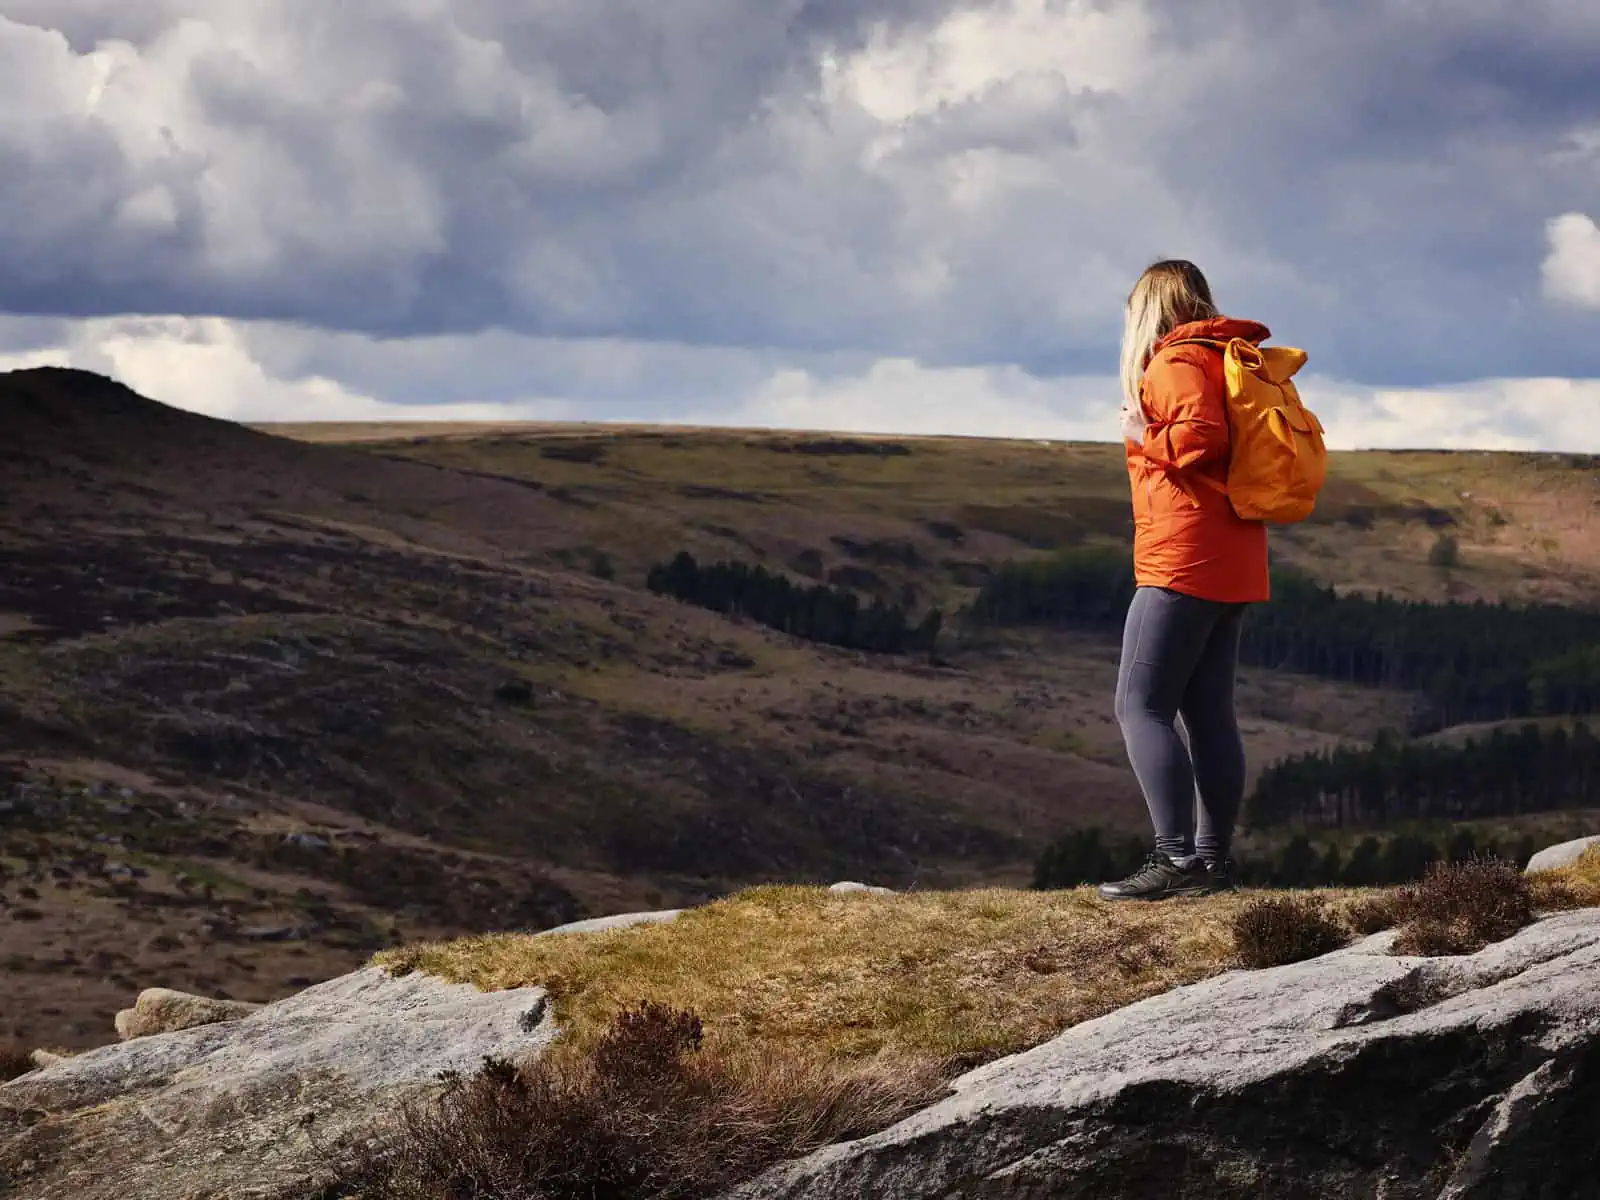 ID: A landscape image. Fay stands to right of the frame and is turned to the side in side profile. Fay wears grey trousers, black shoes, bright red coat and yellow bag. Fay stands on a section of mossy hill with rocks formed in the hills around. In the background are large, undulating hills which are green and brown. The sky is quite dark with sections of open blue sky which are casting a dramatic shadow onto the hills around and casting a spot light on Fay.